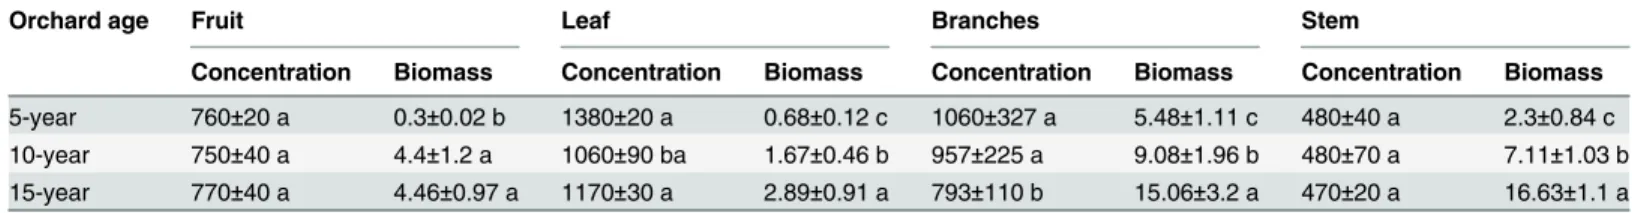 Table 1. Phosphorus concentration and aboveground biomass in different organs of apple trees.